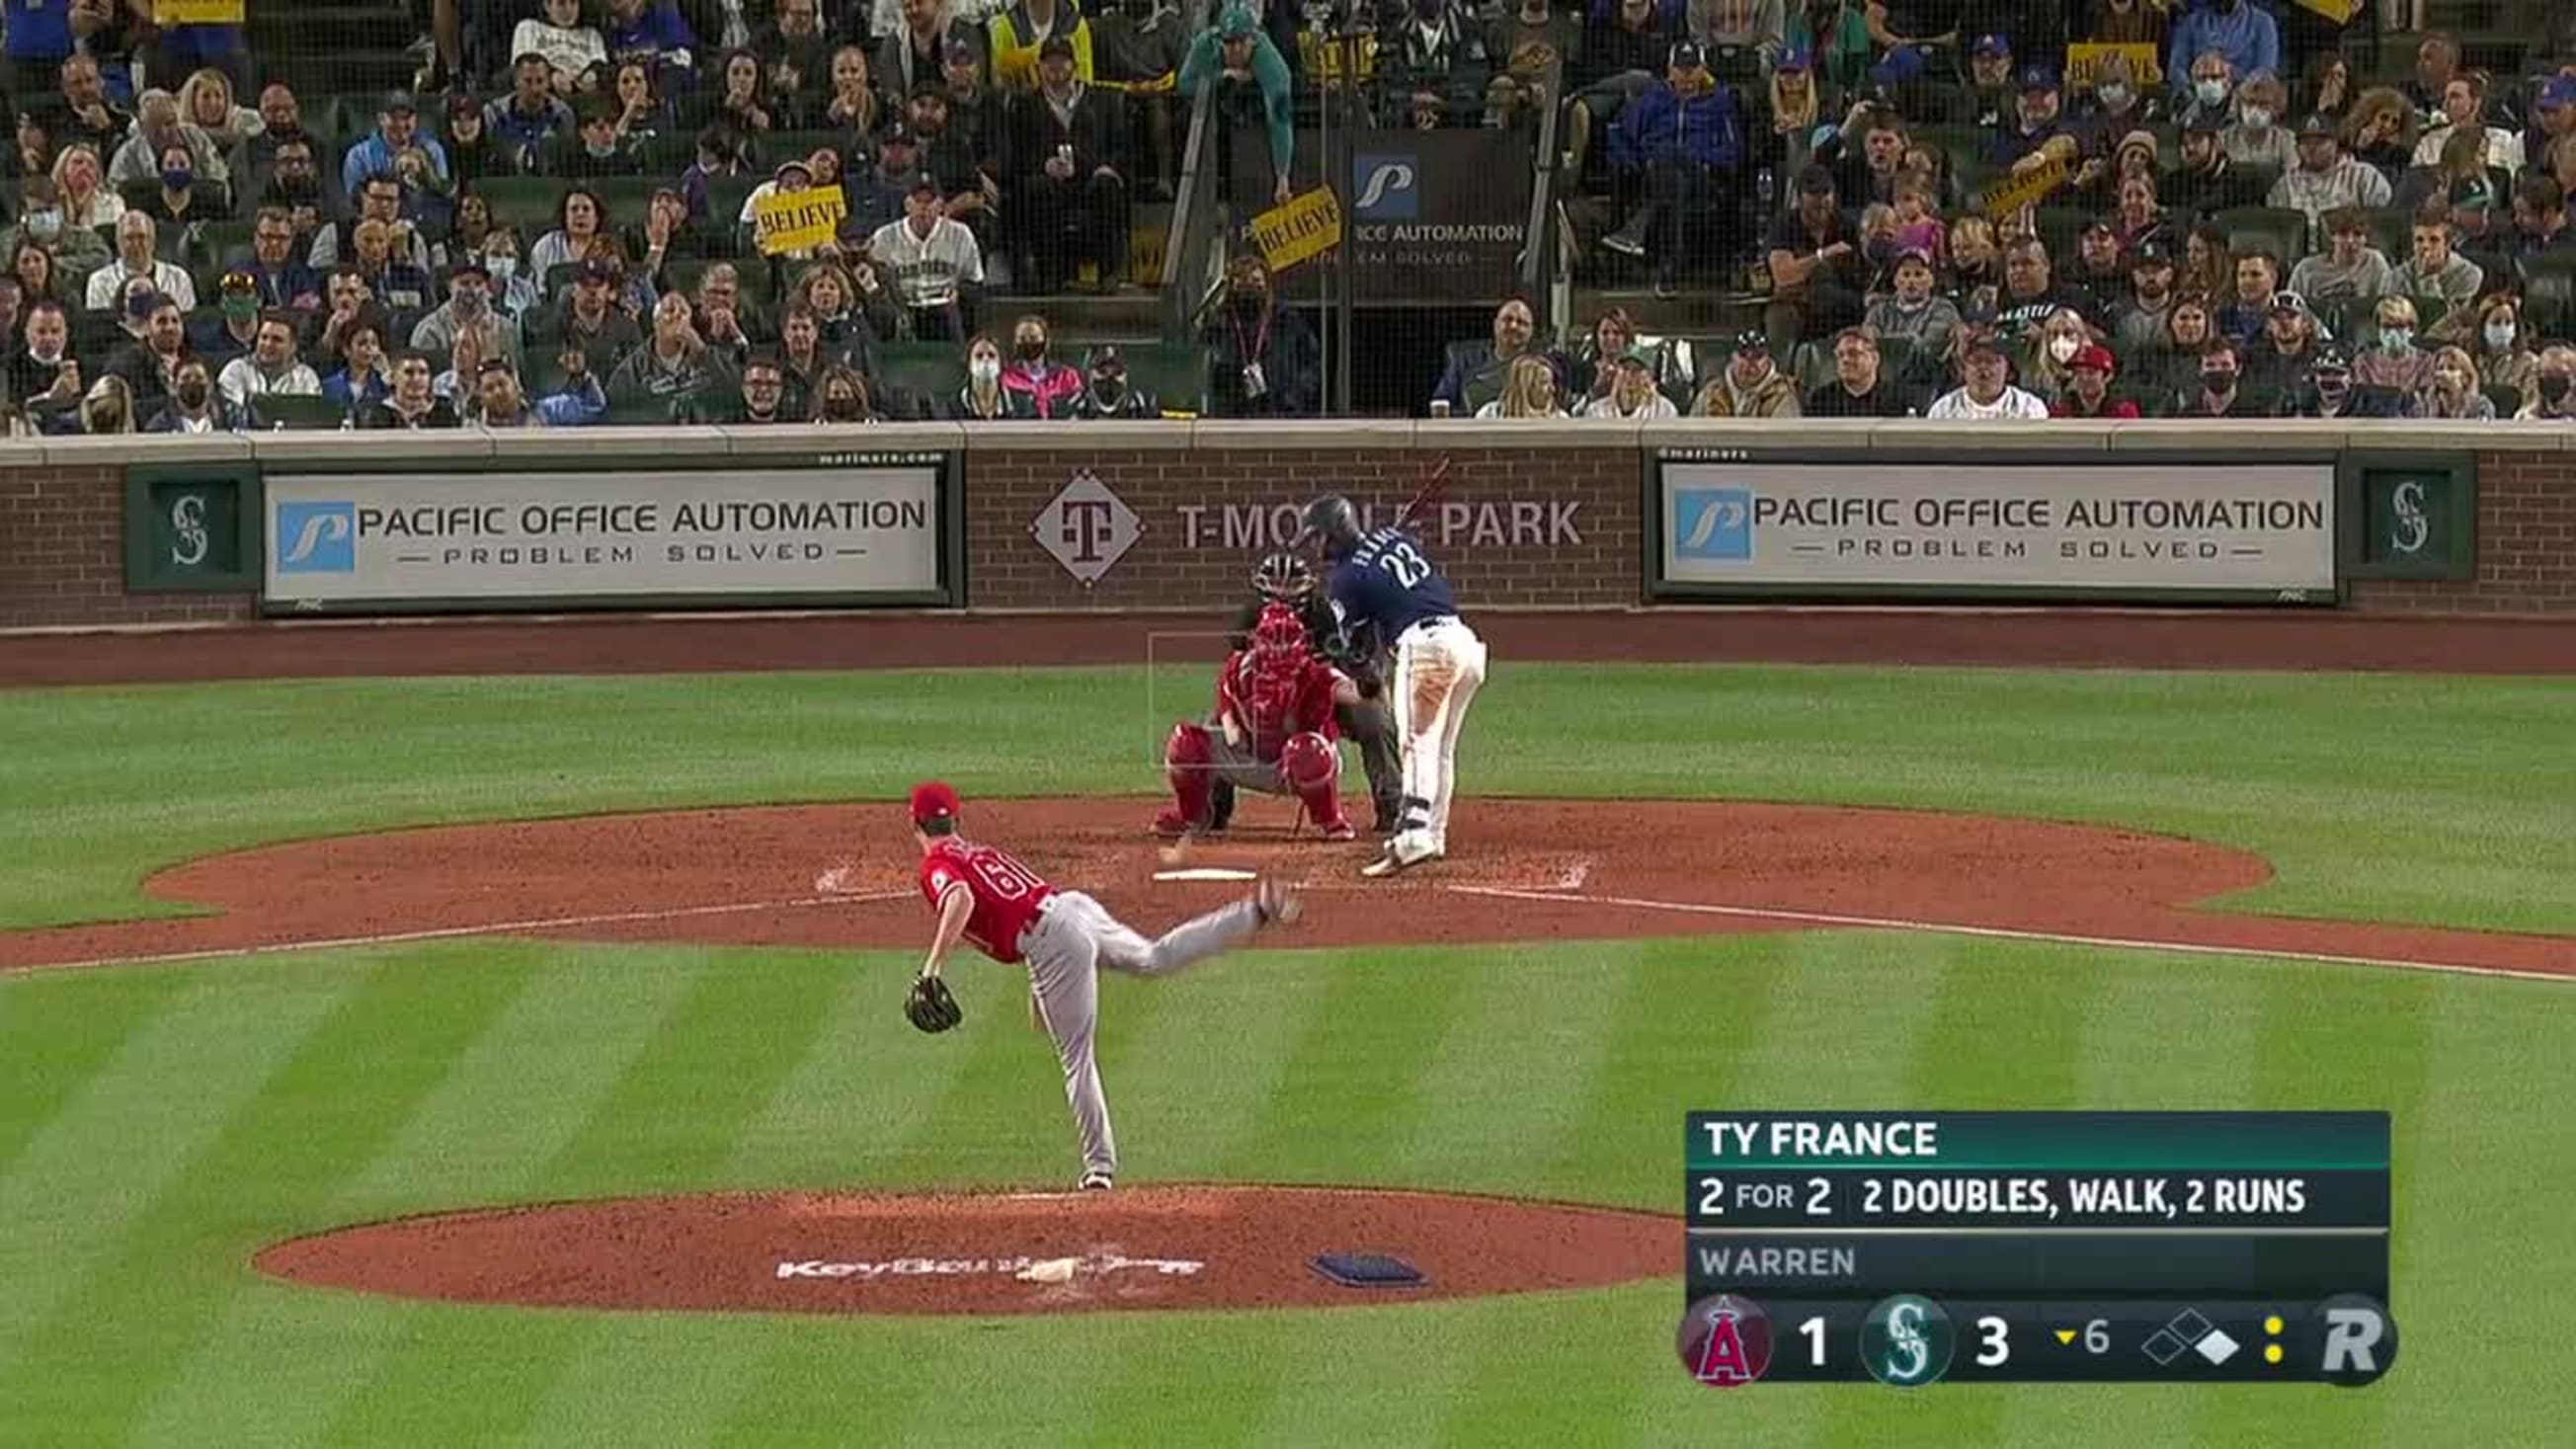 Ty France hit by pitch. J.P. Crawford to 2nd., 10/02/2021